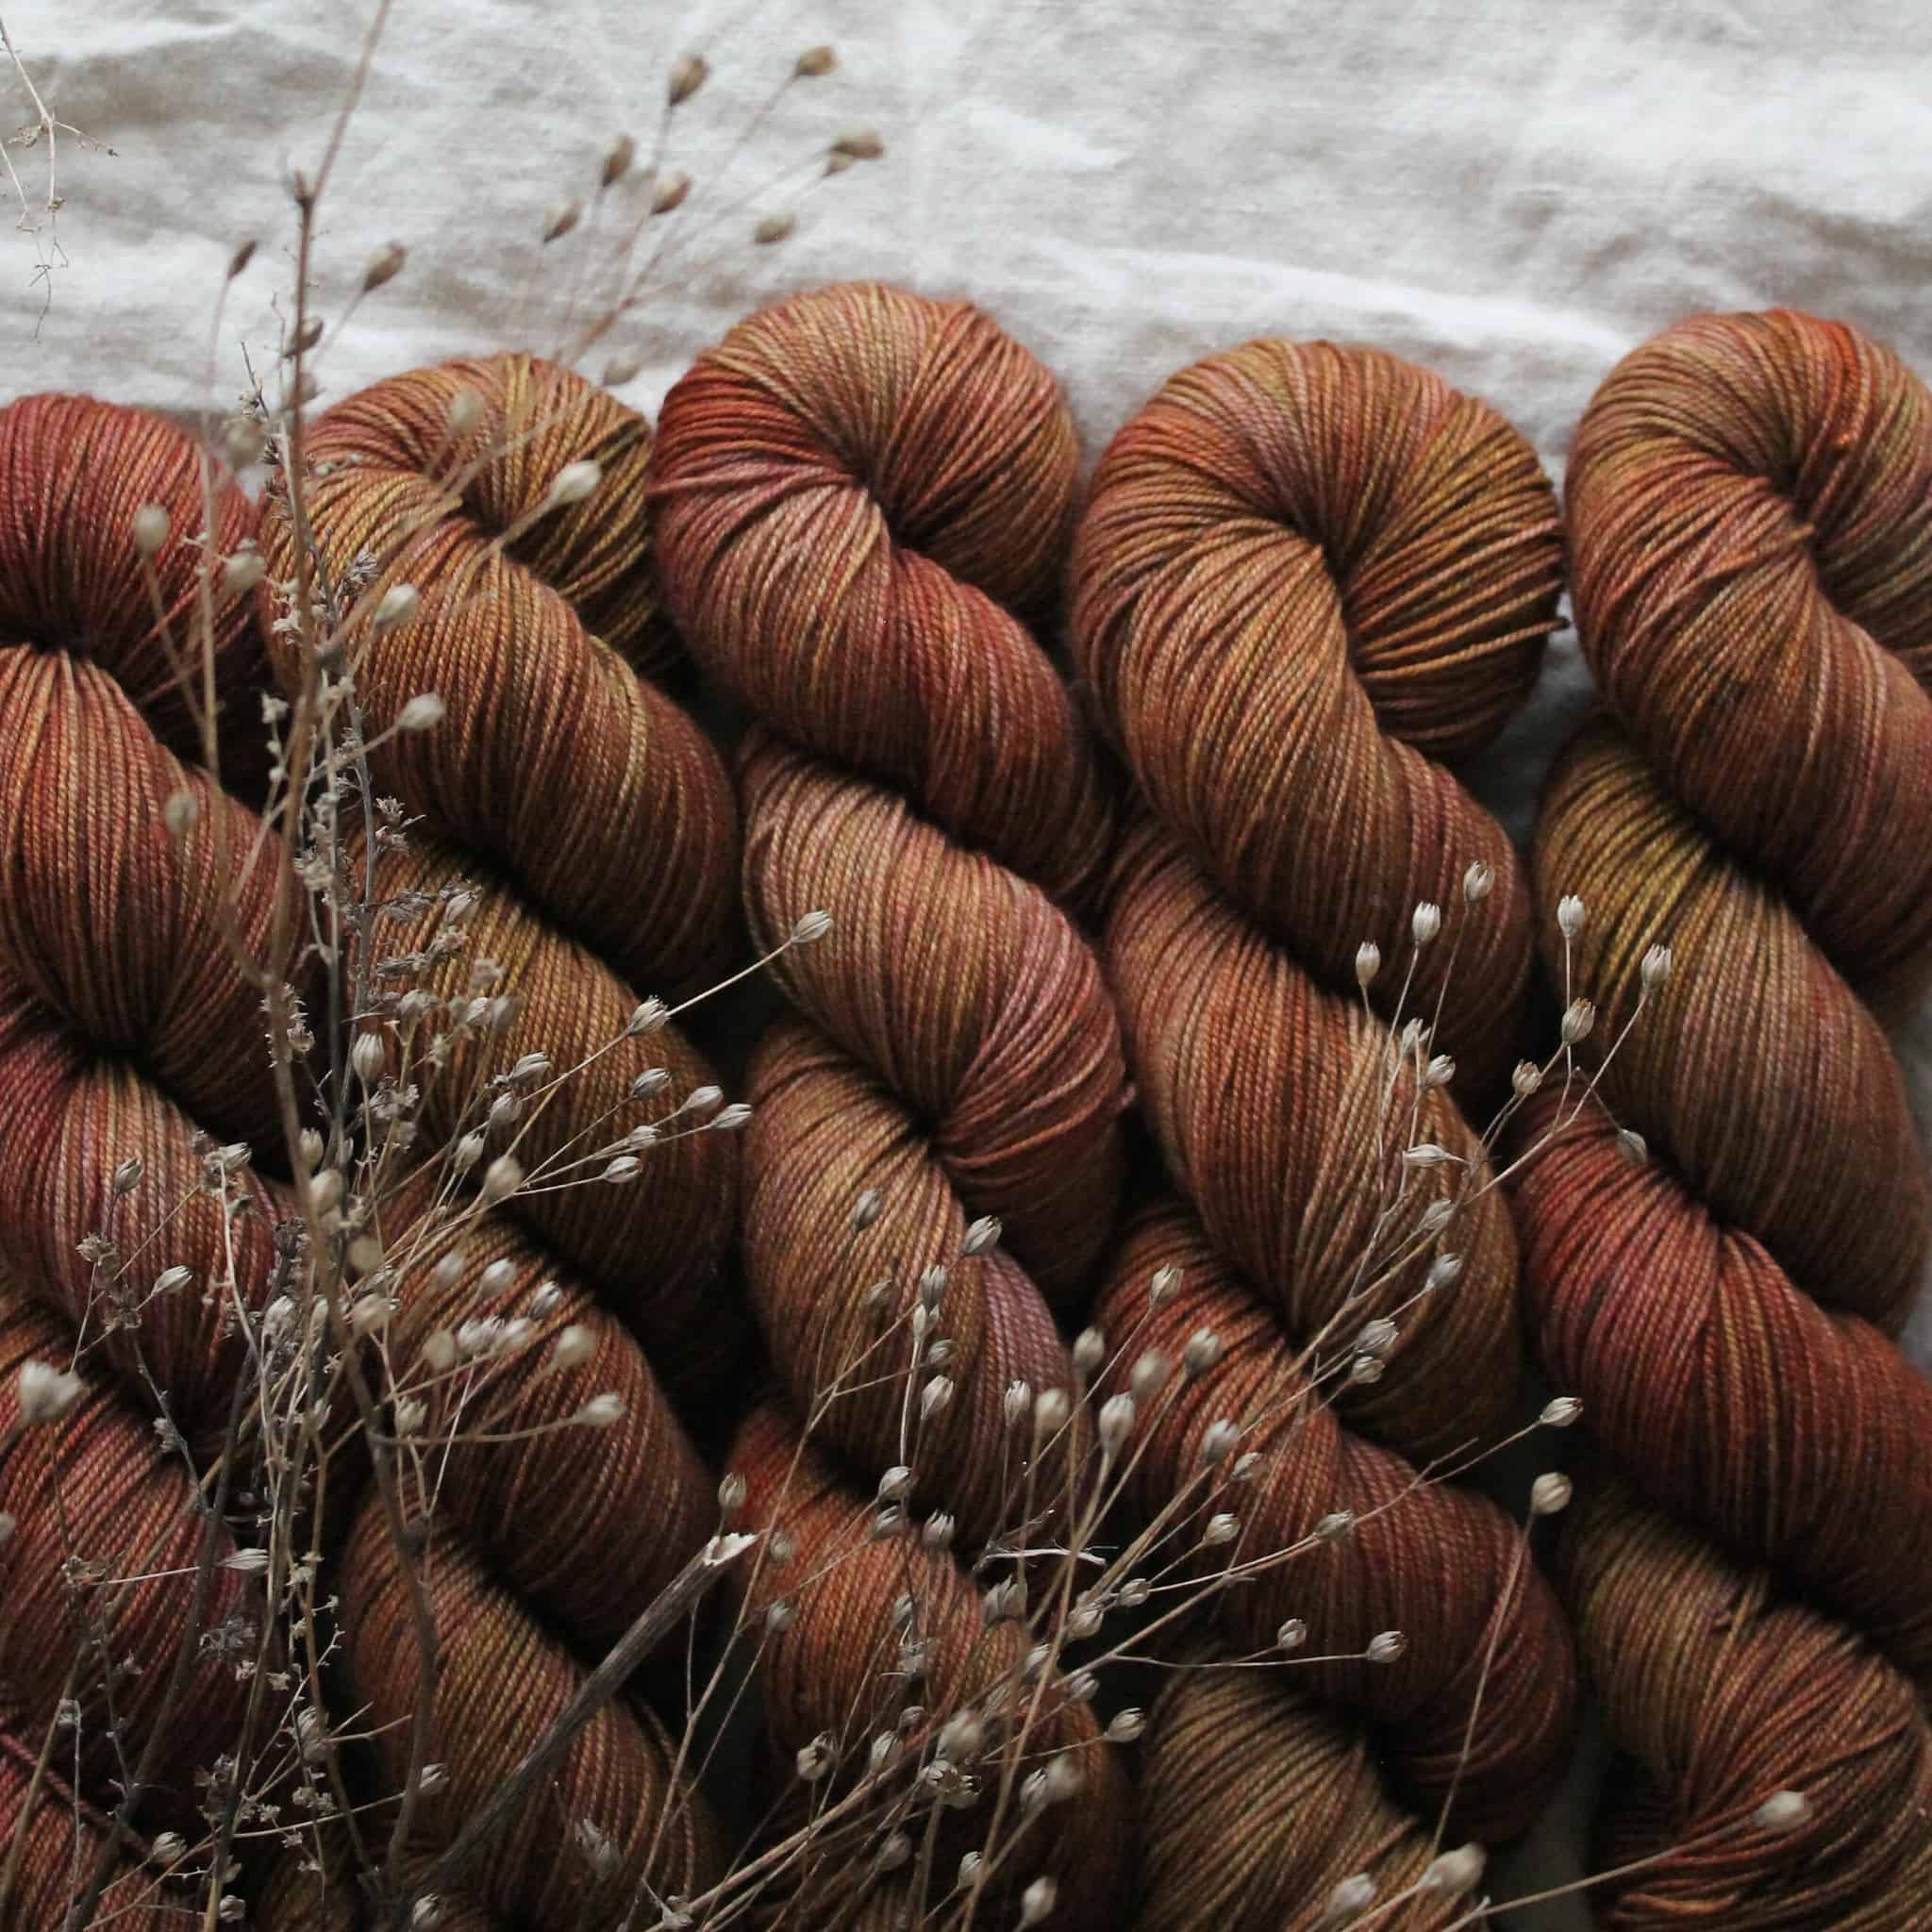 Skeins of brown yarn with small white flowers.